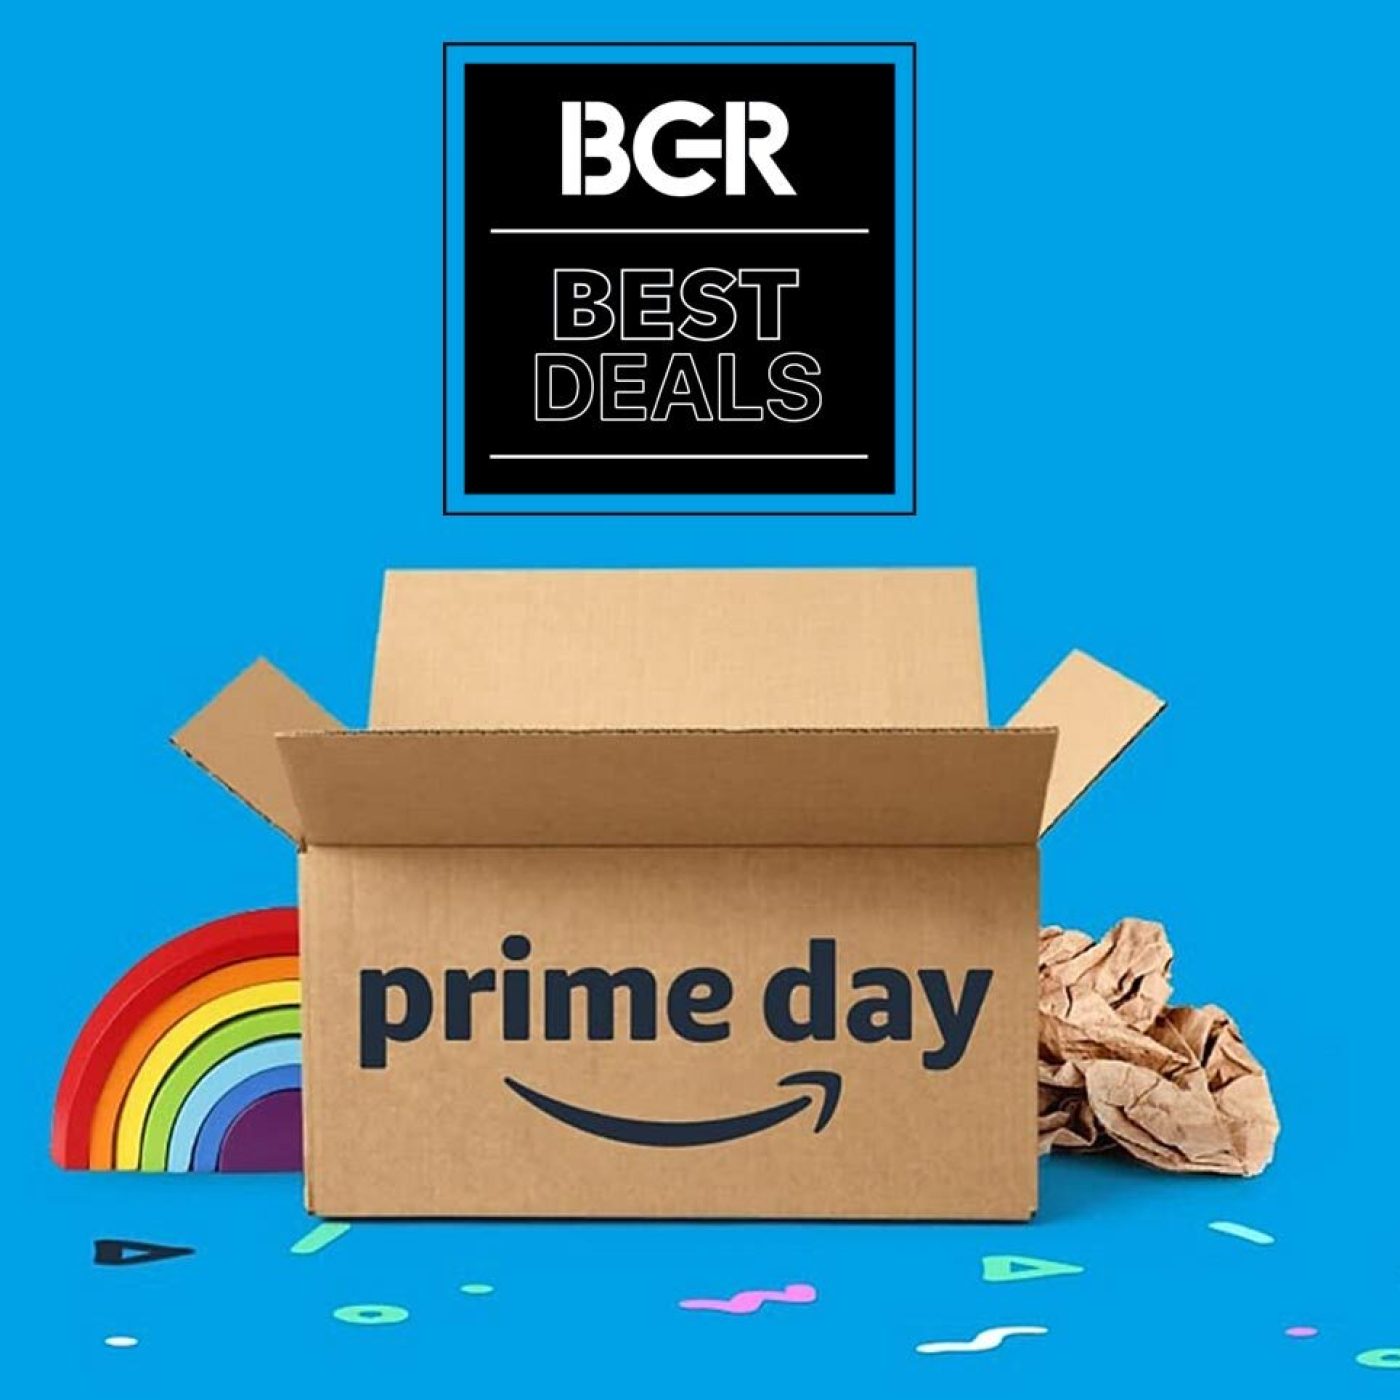 These 50% Off Prime Day Deals are too good to miss